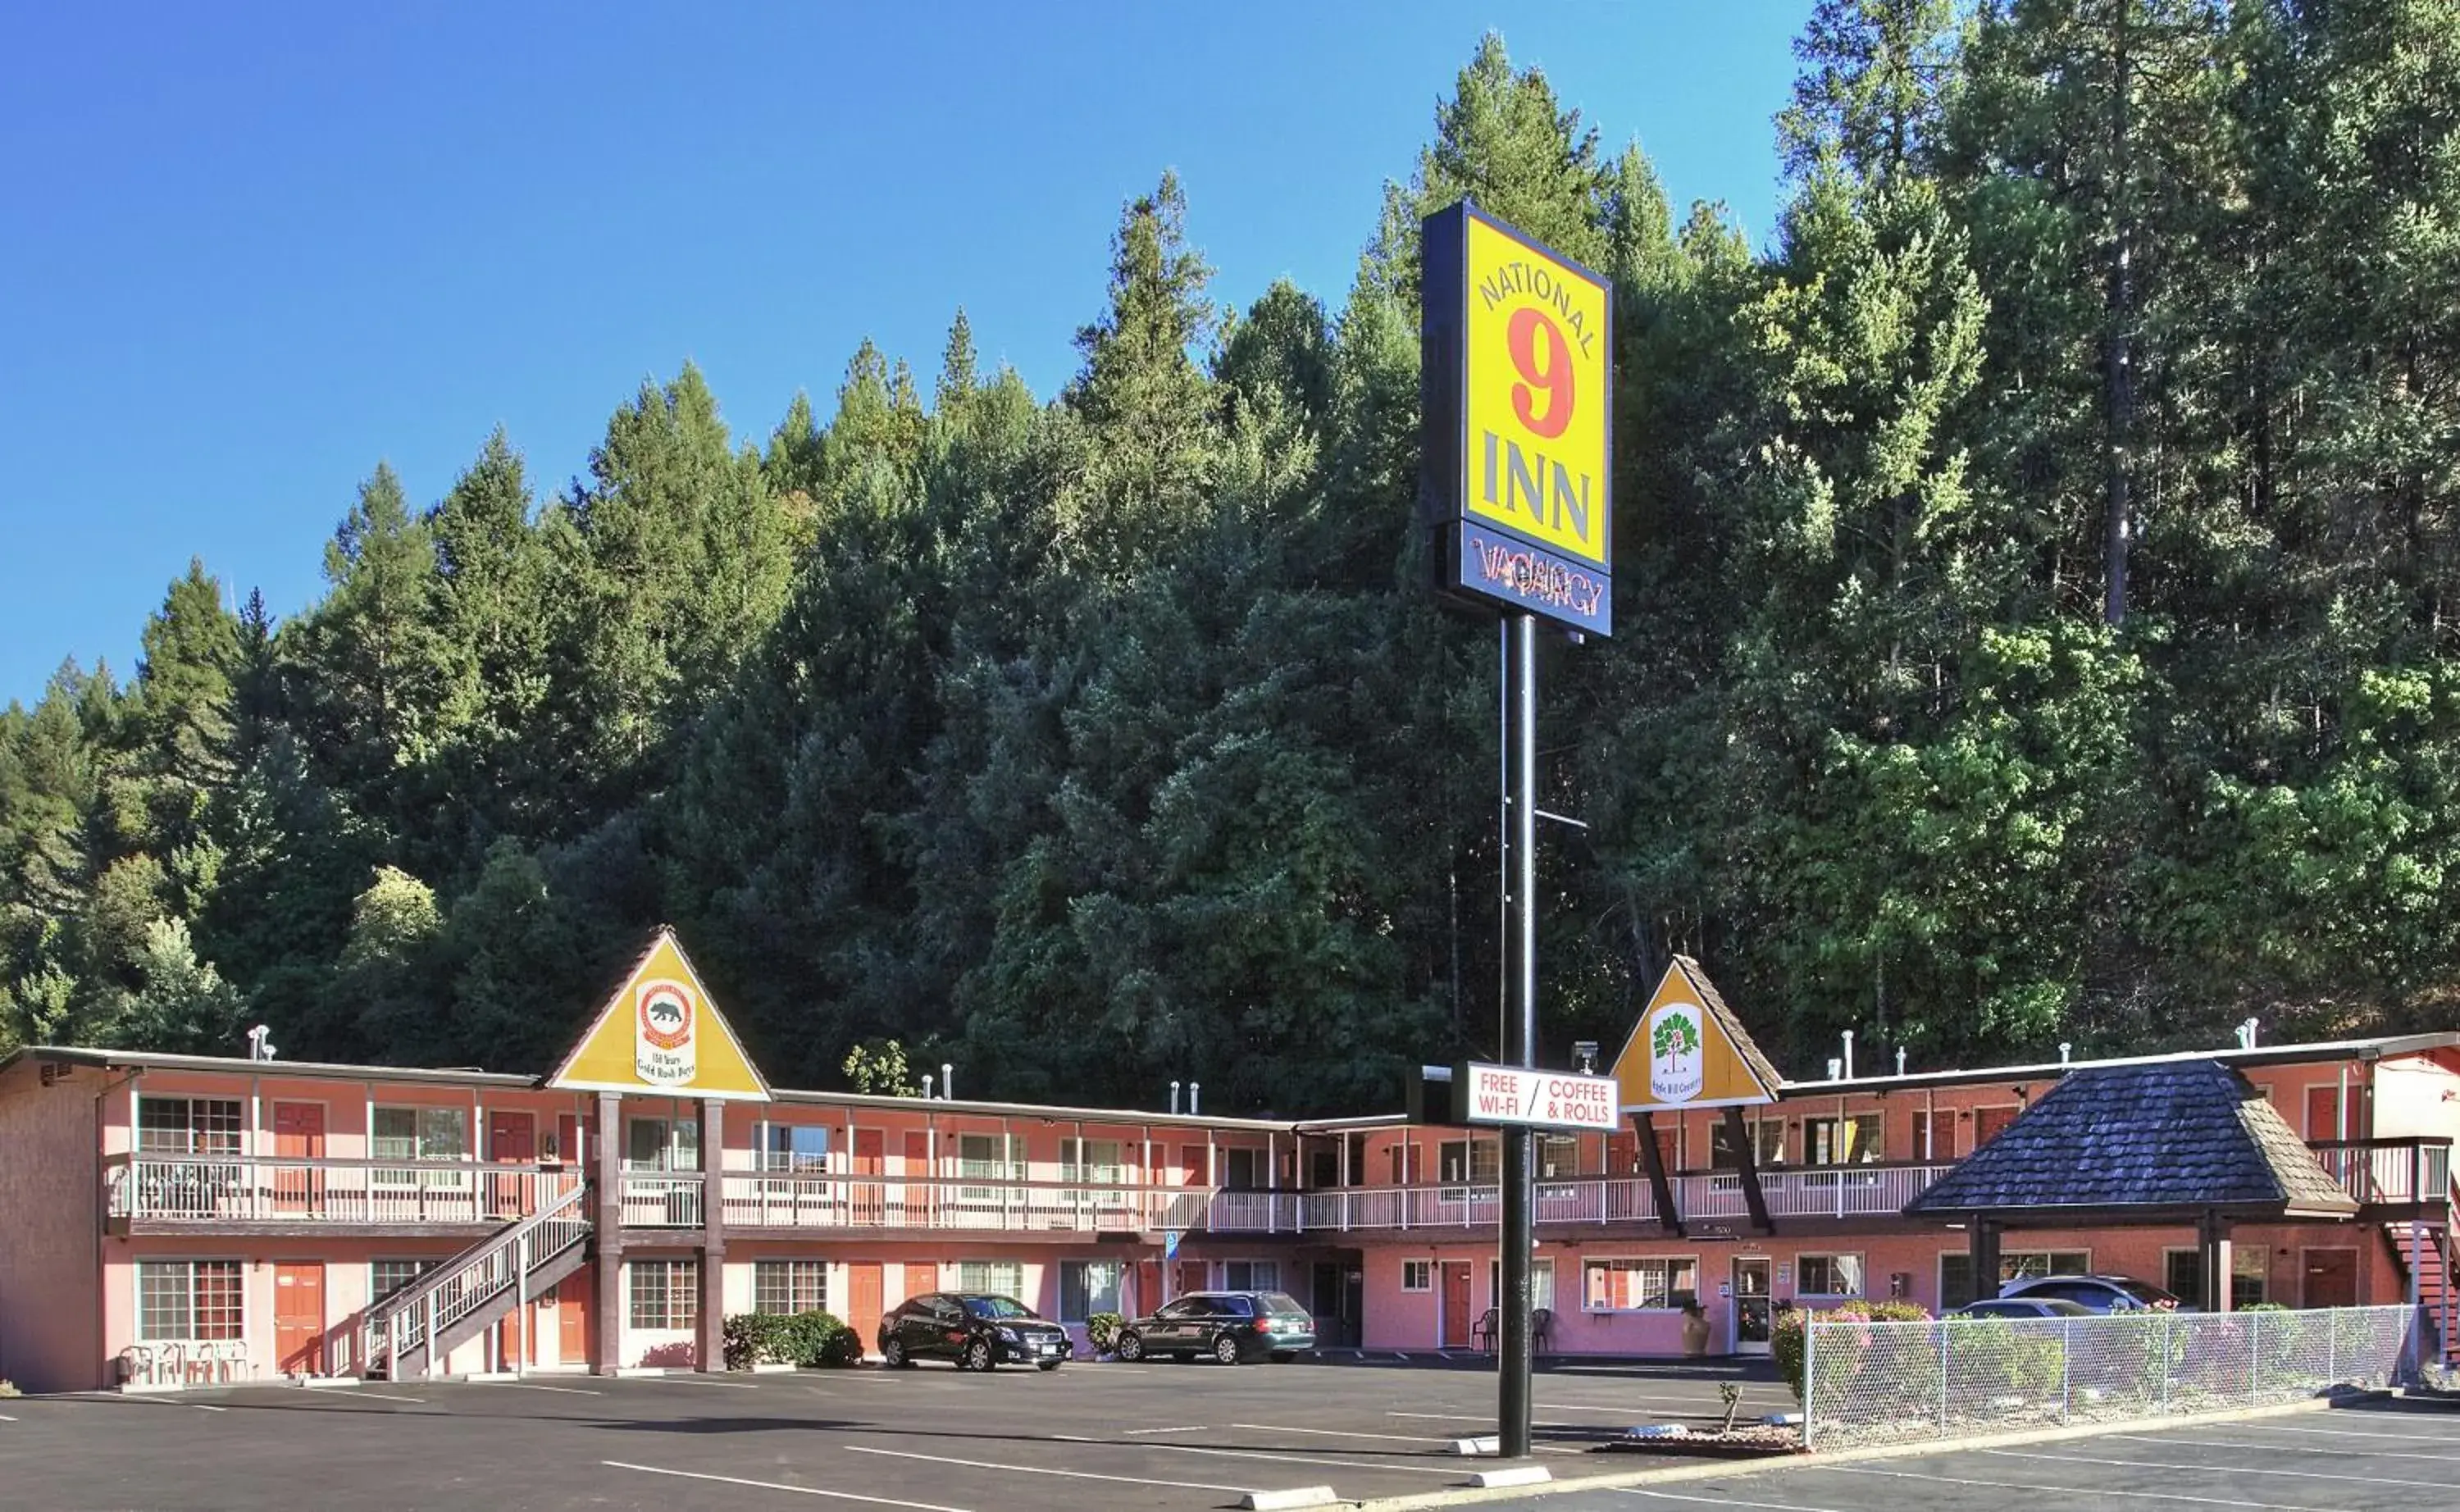 View (from property/room), Property Building in National 9 Inn - Placerville